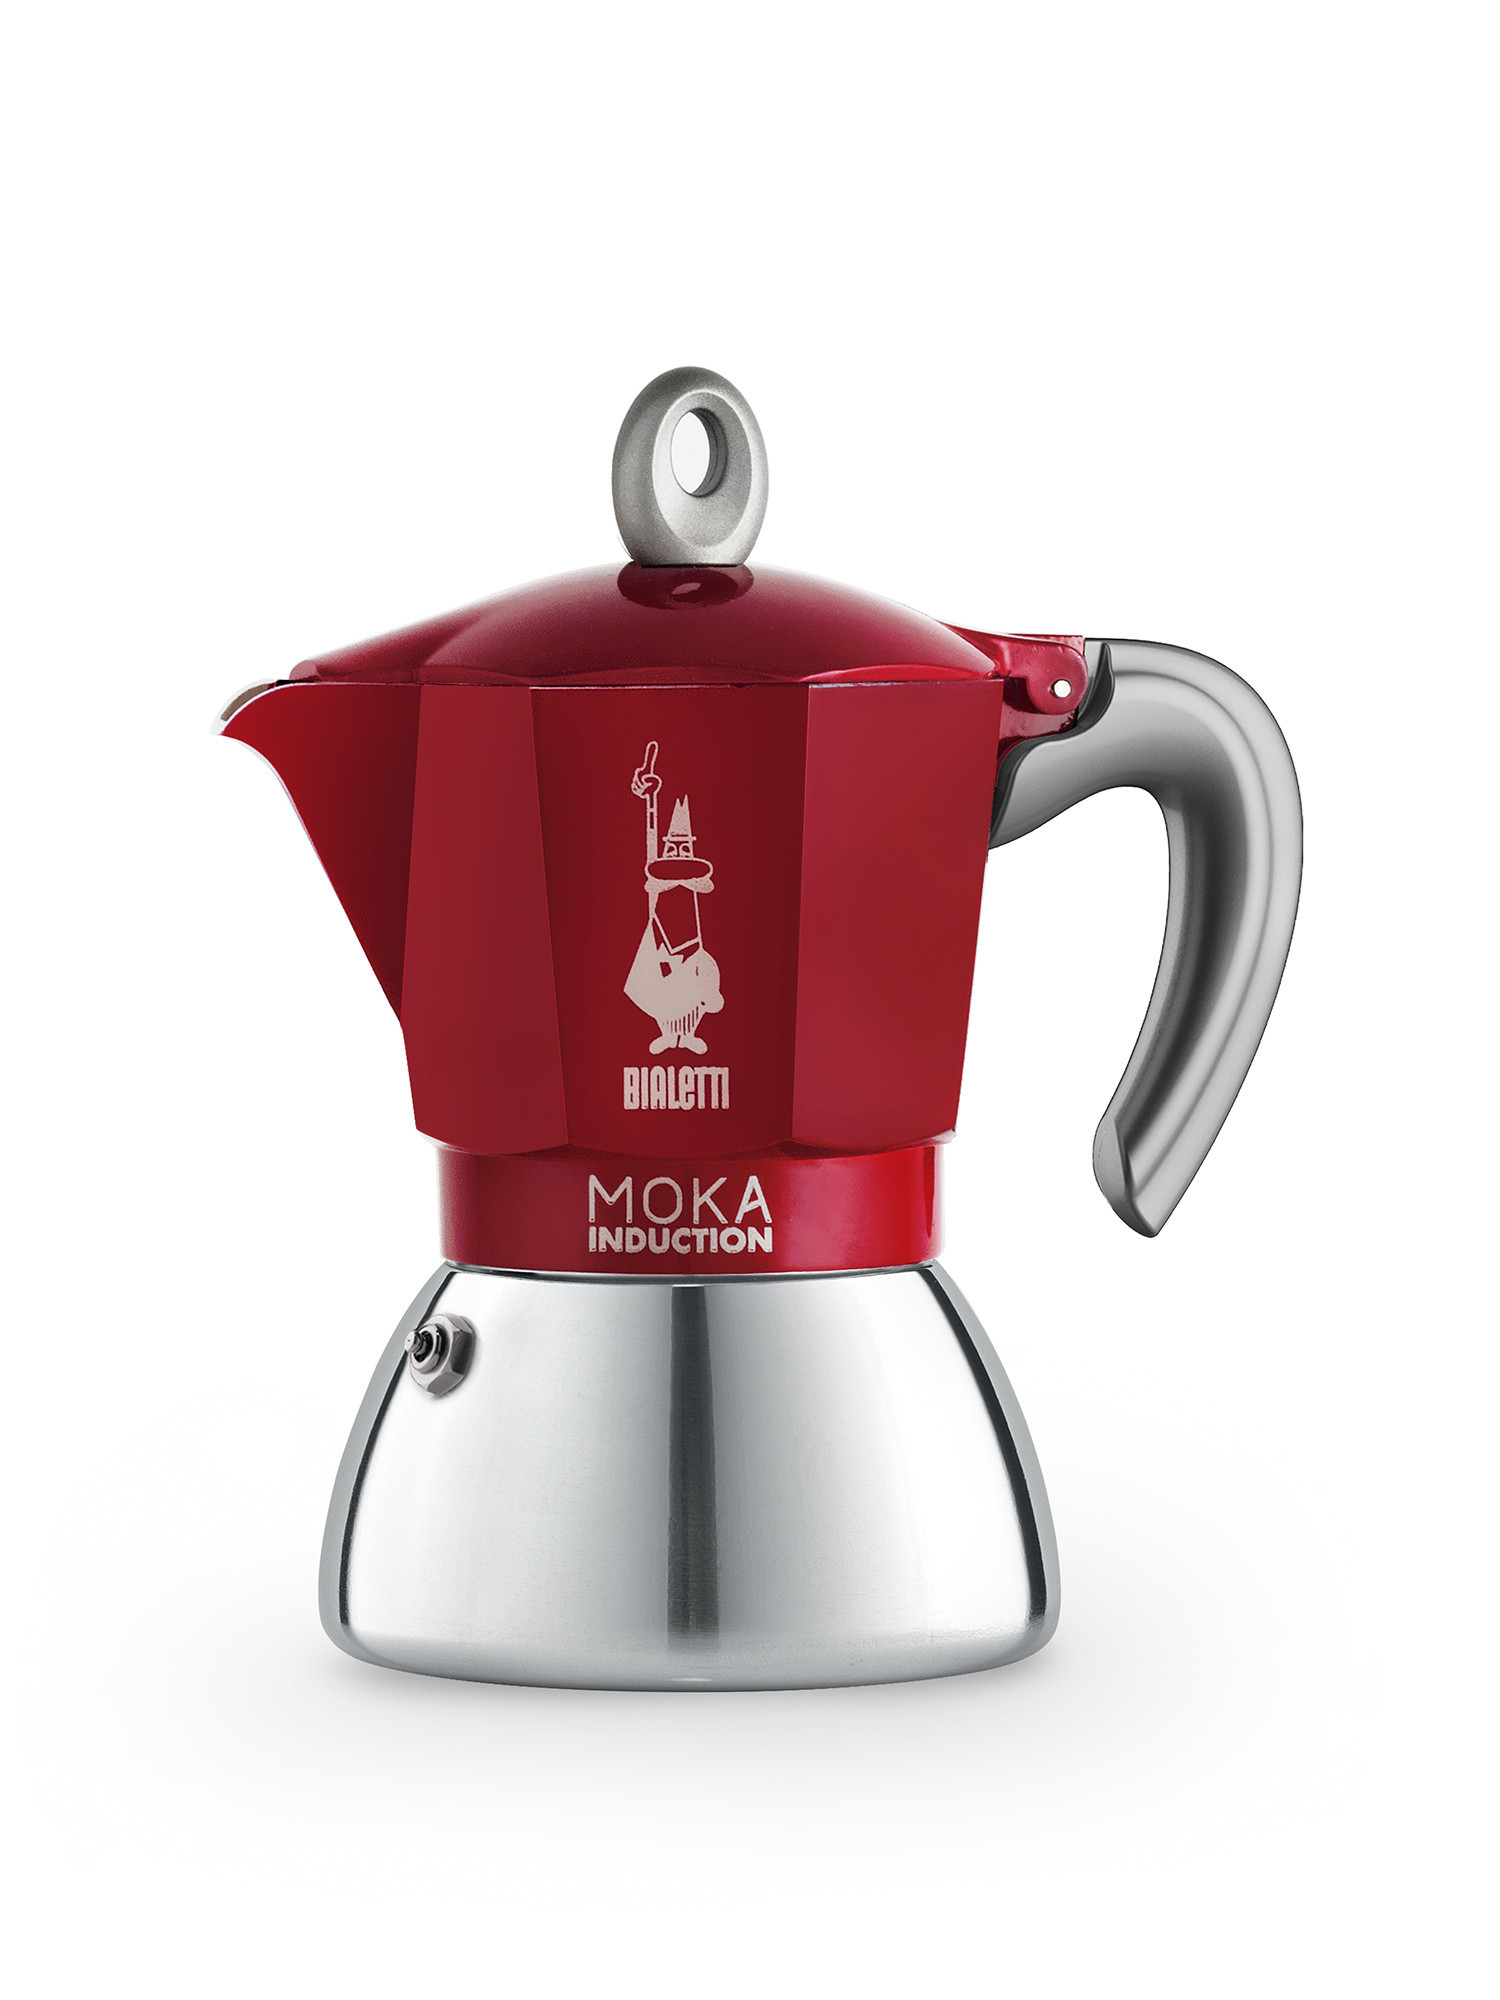 Bialetti - Moka Induction 6 tazze, Rosso, large image number 0